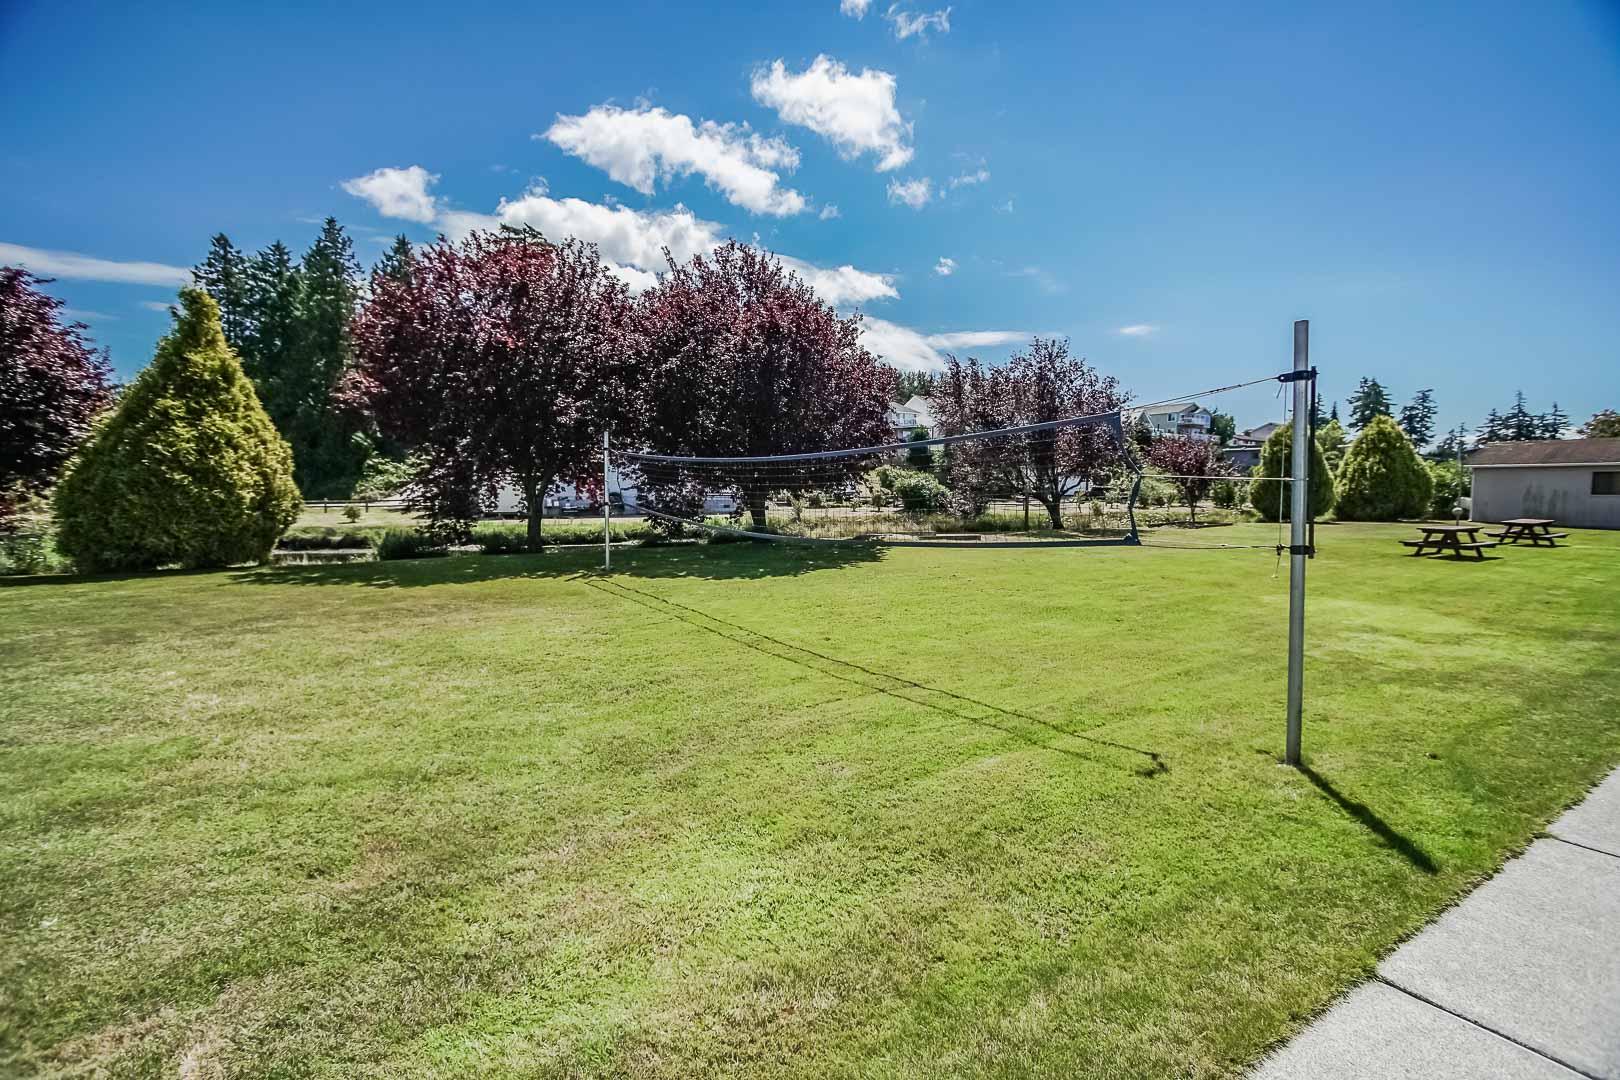 A volleyball net on the grass area at VRI's Cabana Club in Blaine, Washington.